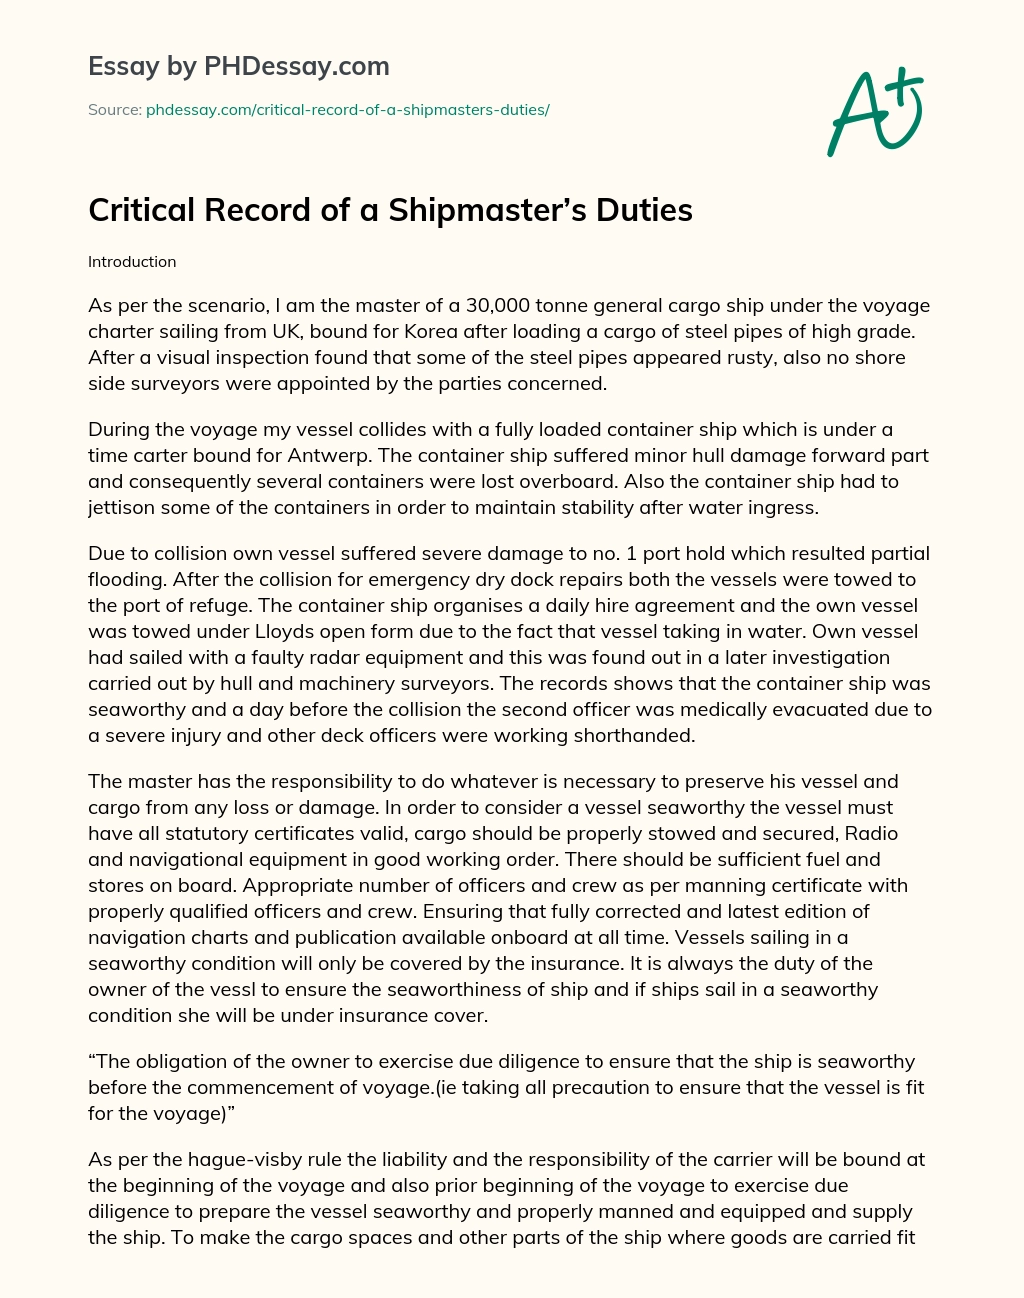 Critical Record of a Shipmaster’s Duties essay